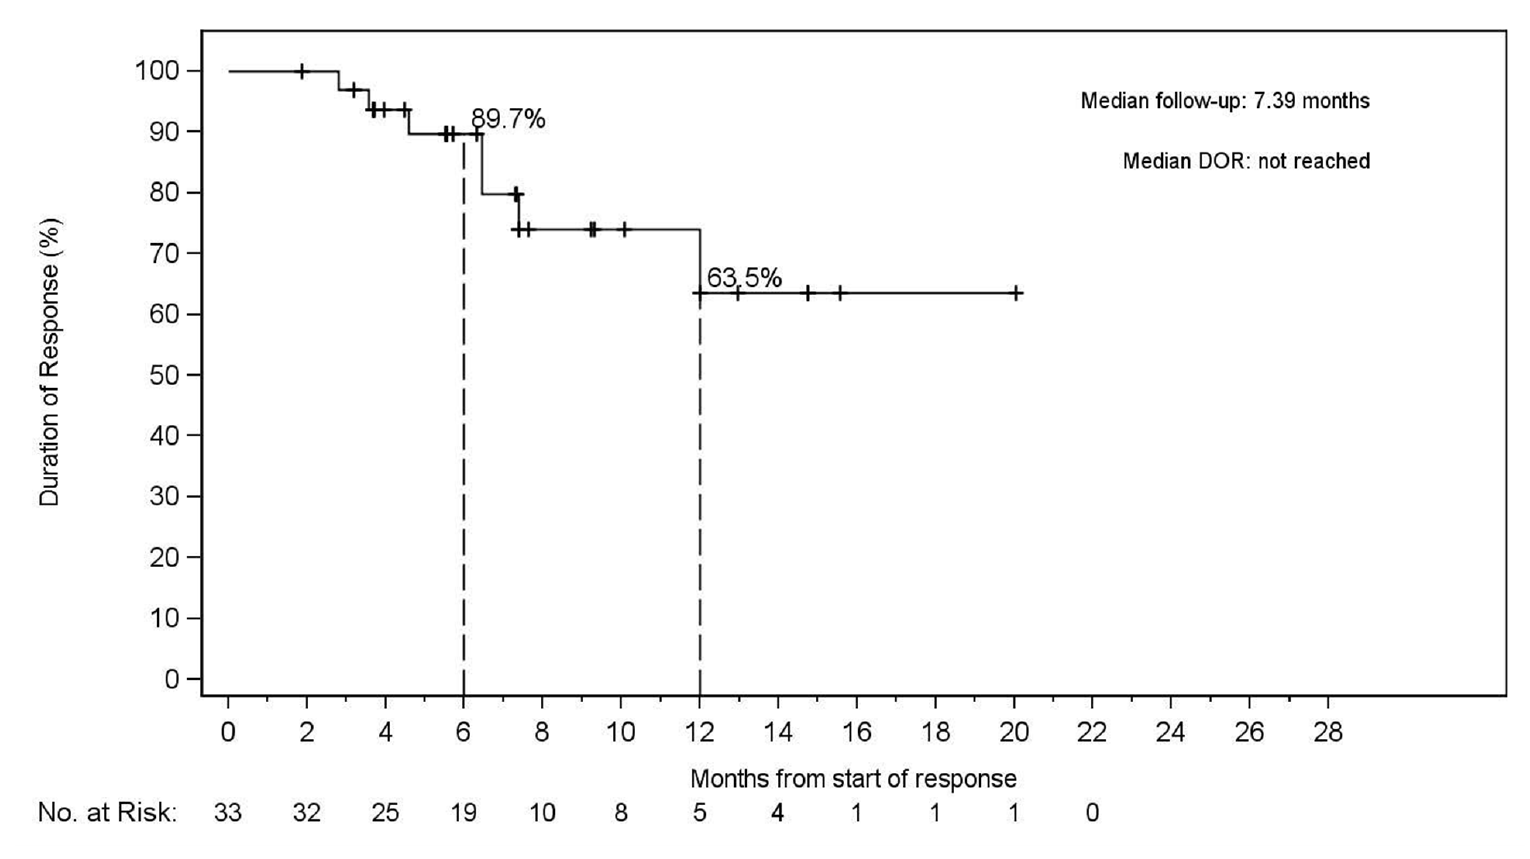 In this Kaplan–Meier plot of duration of response (DOR) in the treatment-naïve RET fusion-positive non–small cell lung cancer population based on the independent radiographic committee assessment, the number of at-risk patients receiving selpercatinib at 0, 2, 4, 6, 8, 12, 14, 16, 18, 20, and 22 months was 33, 32, 25, 19, 10, 8, 5, 4, 1, 1, 1, and 0, respectively. The median DOR was not reached.